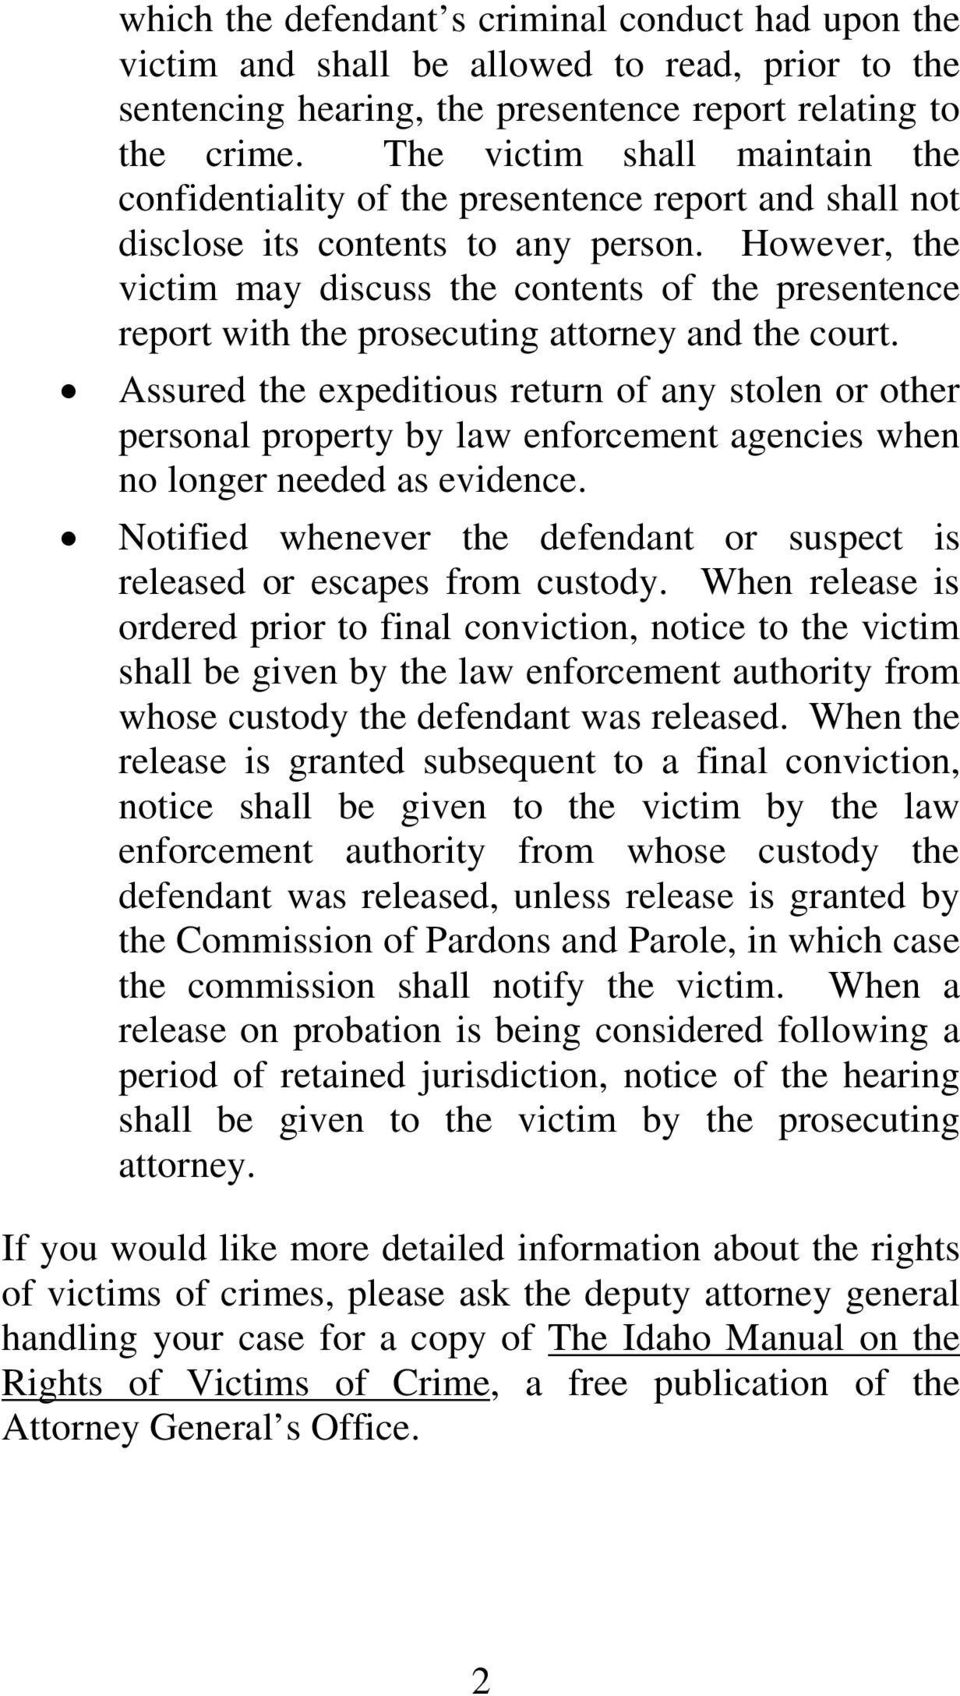 However, the victim may discuss the contents of the presentence report with the prosecuting attorney and the court.